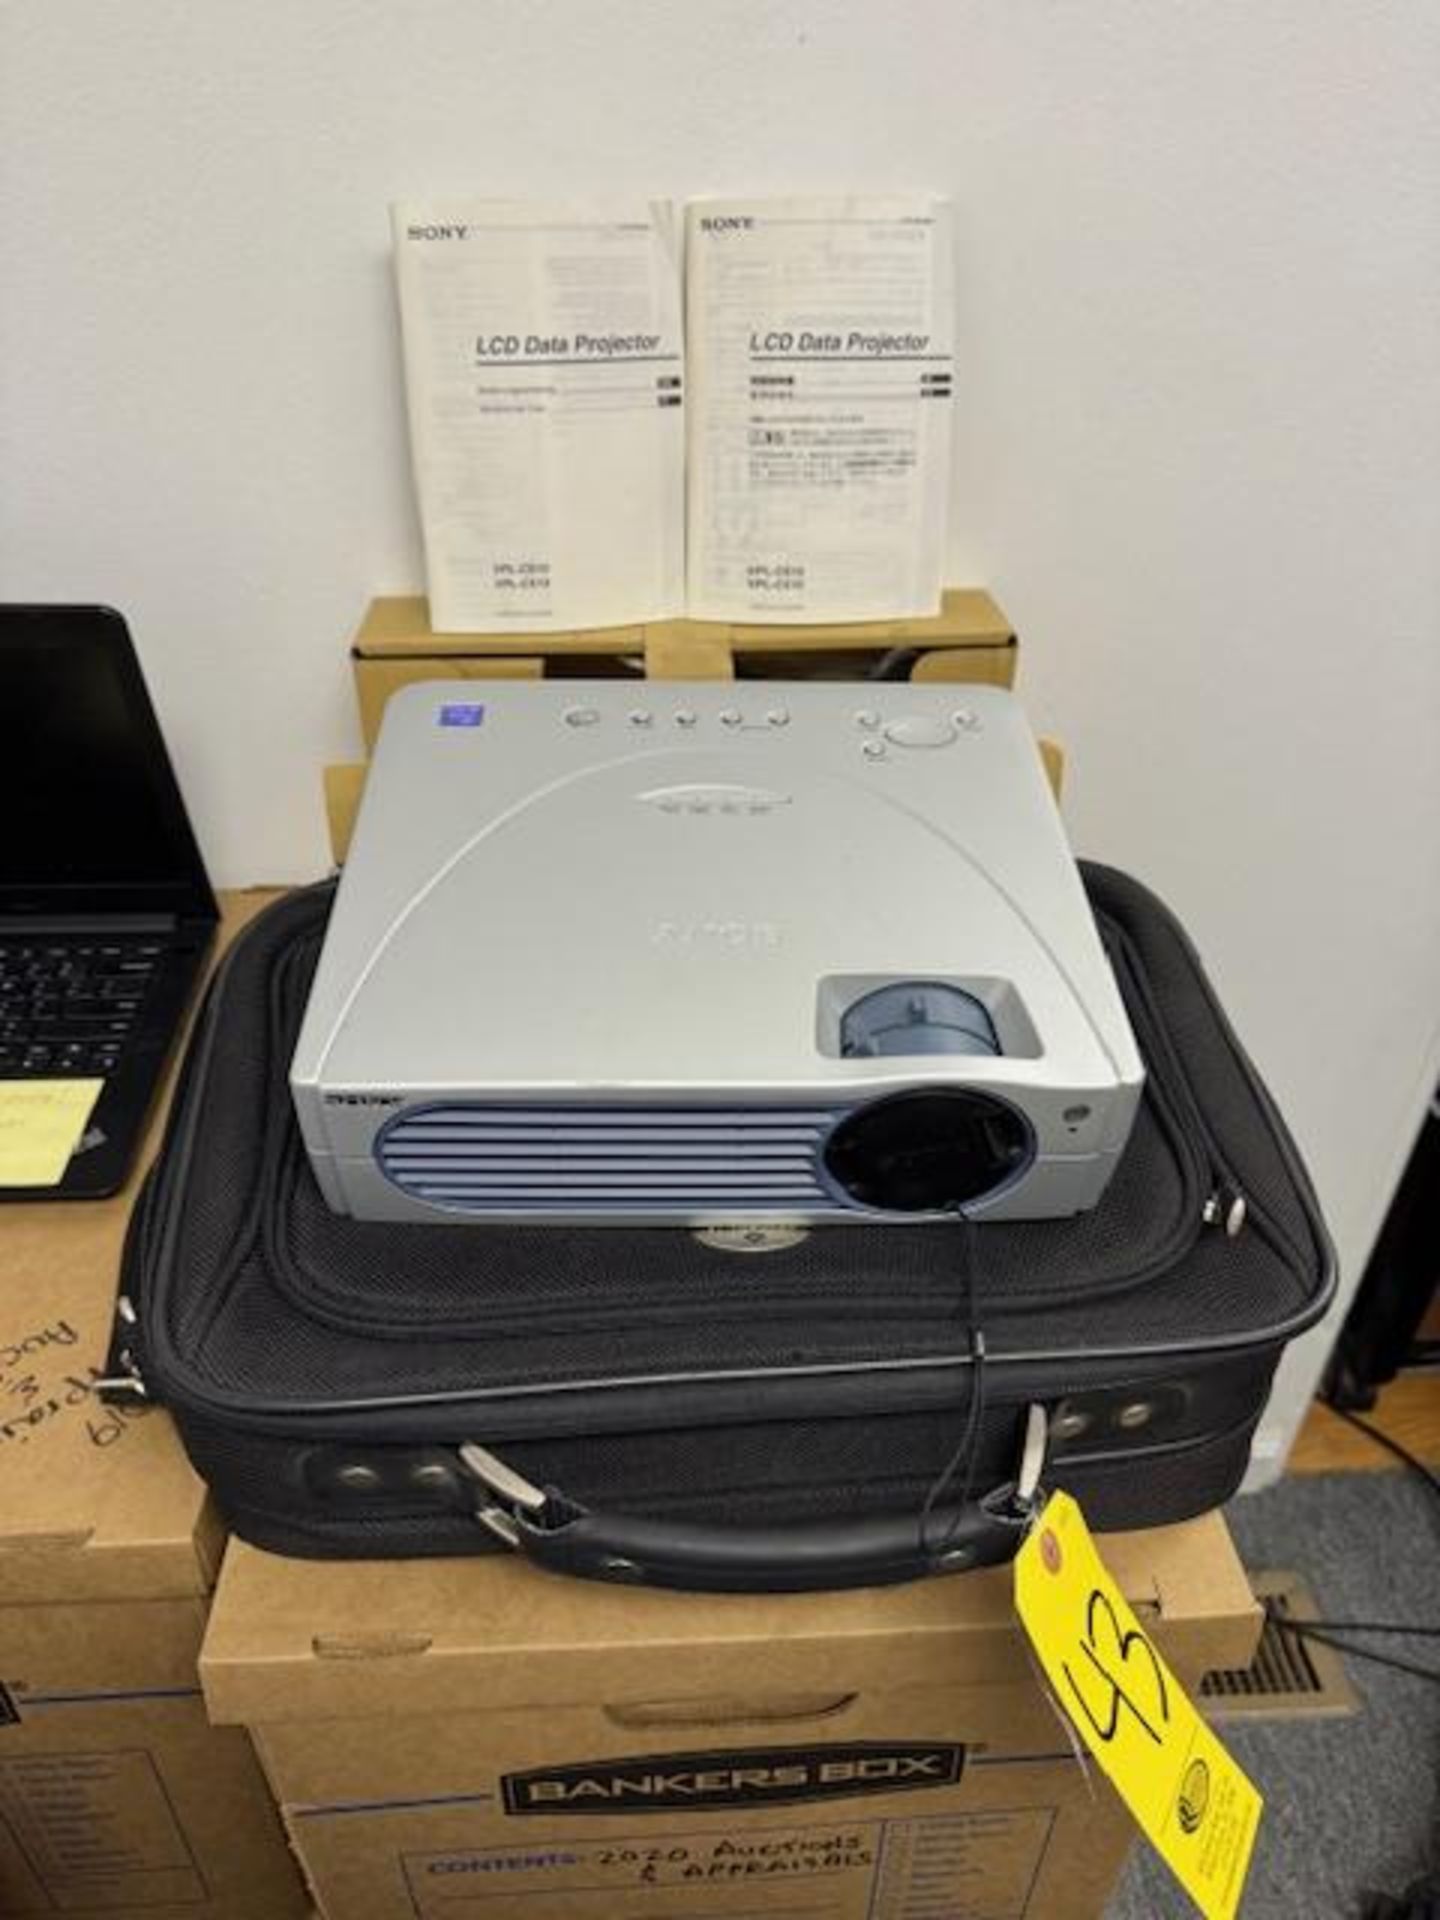 SONY LCD DATA PROJECTOR VPL-CS10 WITH CASE (Located in Willow Grove, PA)